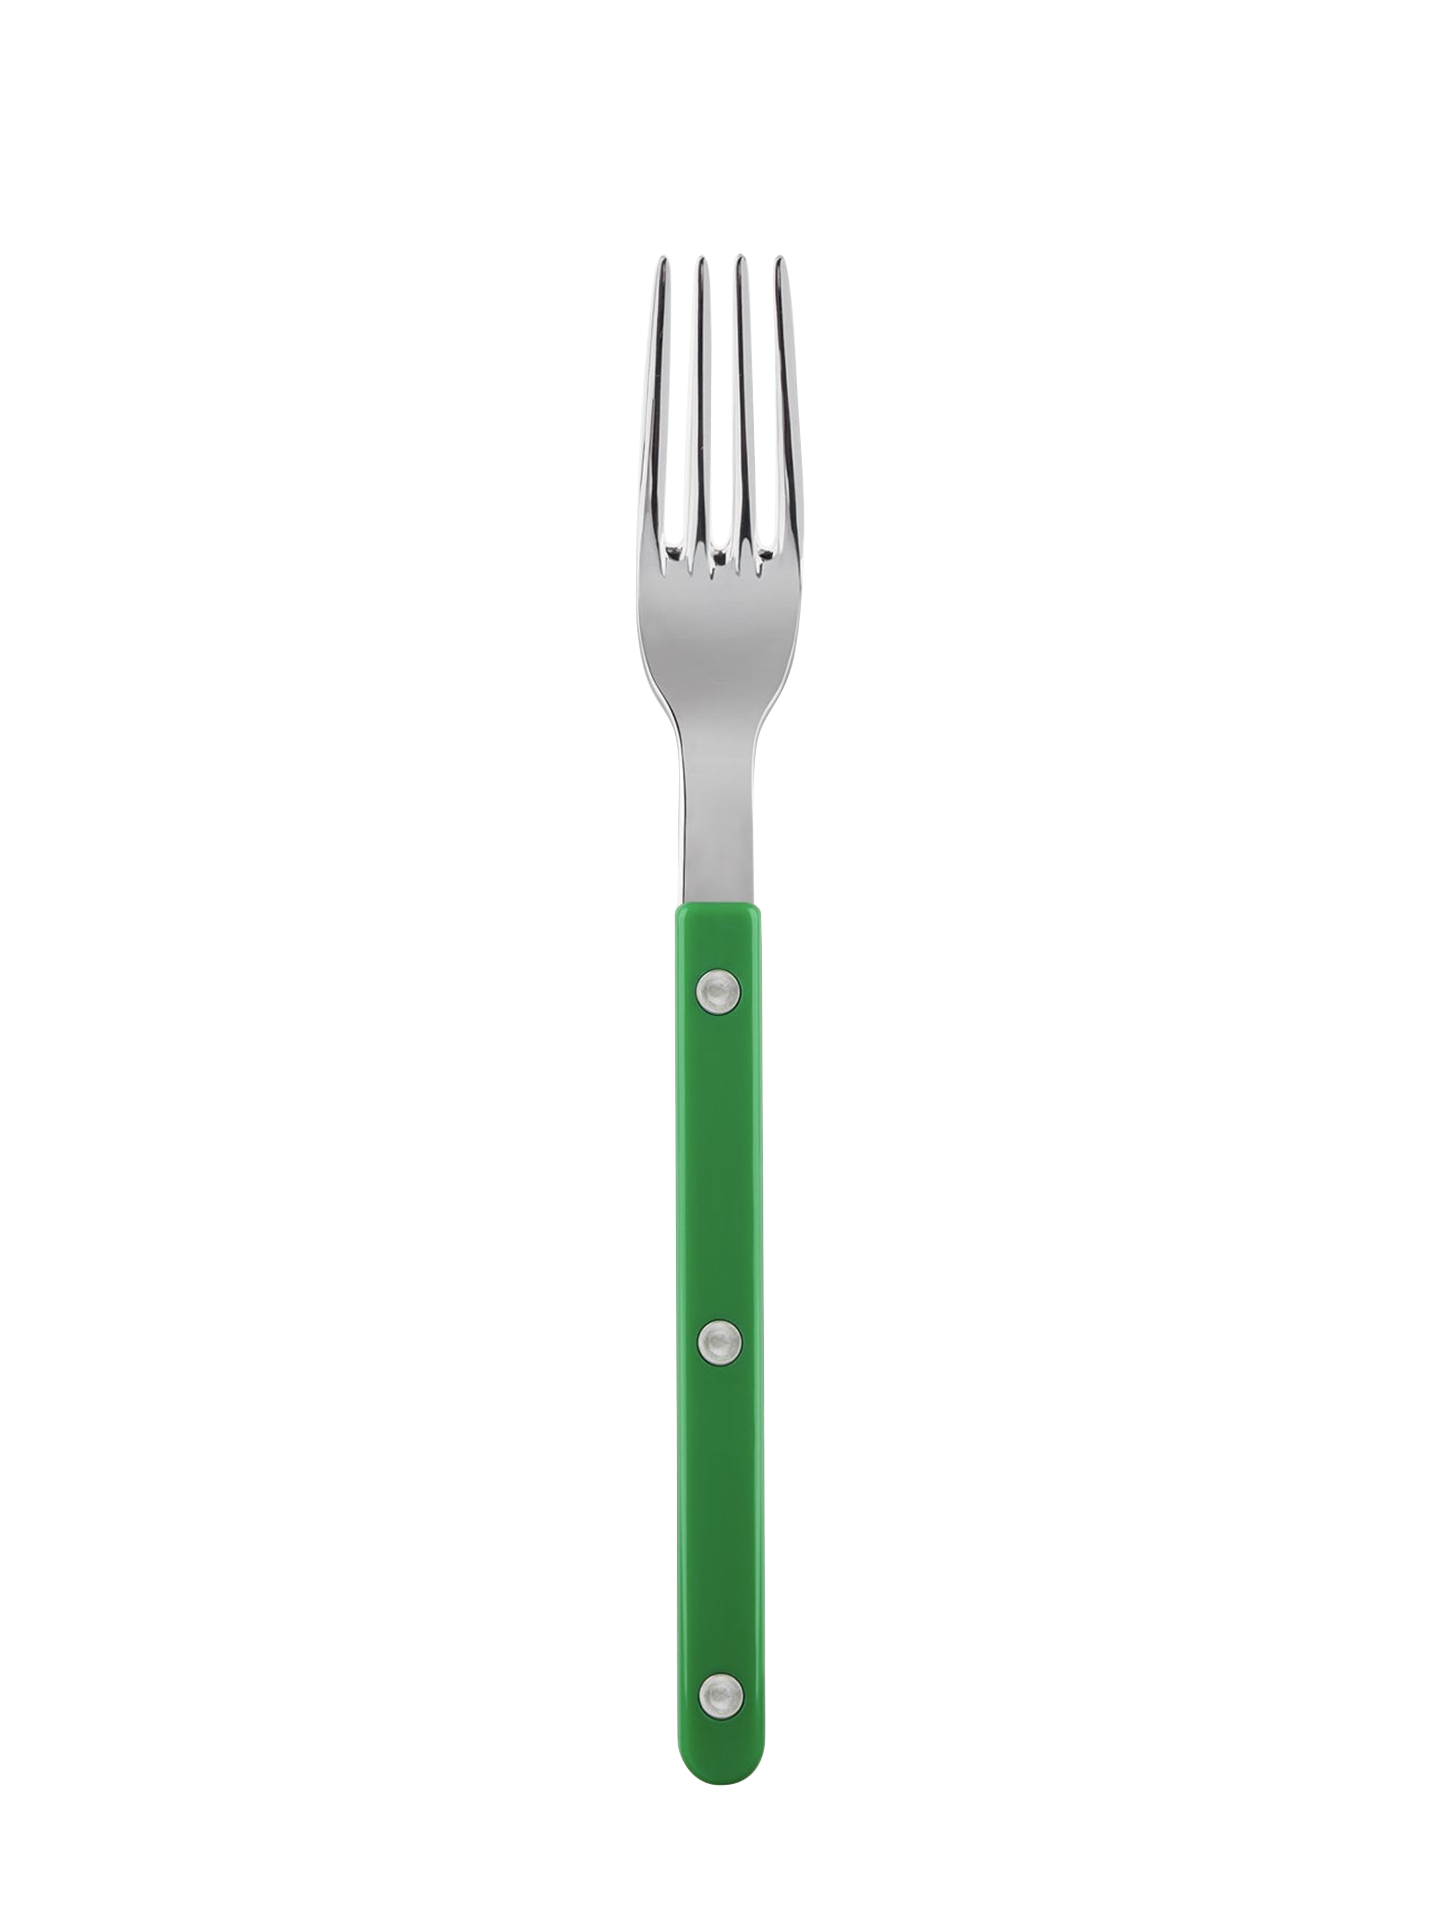 The dinner fork from the Bistrot collection in garden green is a new interpretation from the cutleries of the Parisian cafés and bistros. Fresh as a newly sprouted pea, but utilitarian and minimalist otherwise, this will fit perfectly with contemporary looks with just little mouthful of French chic.